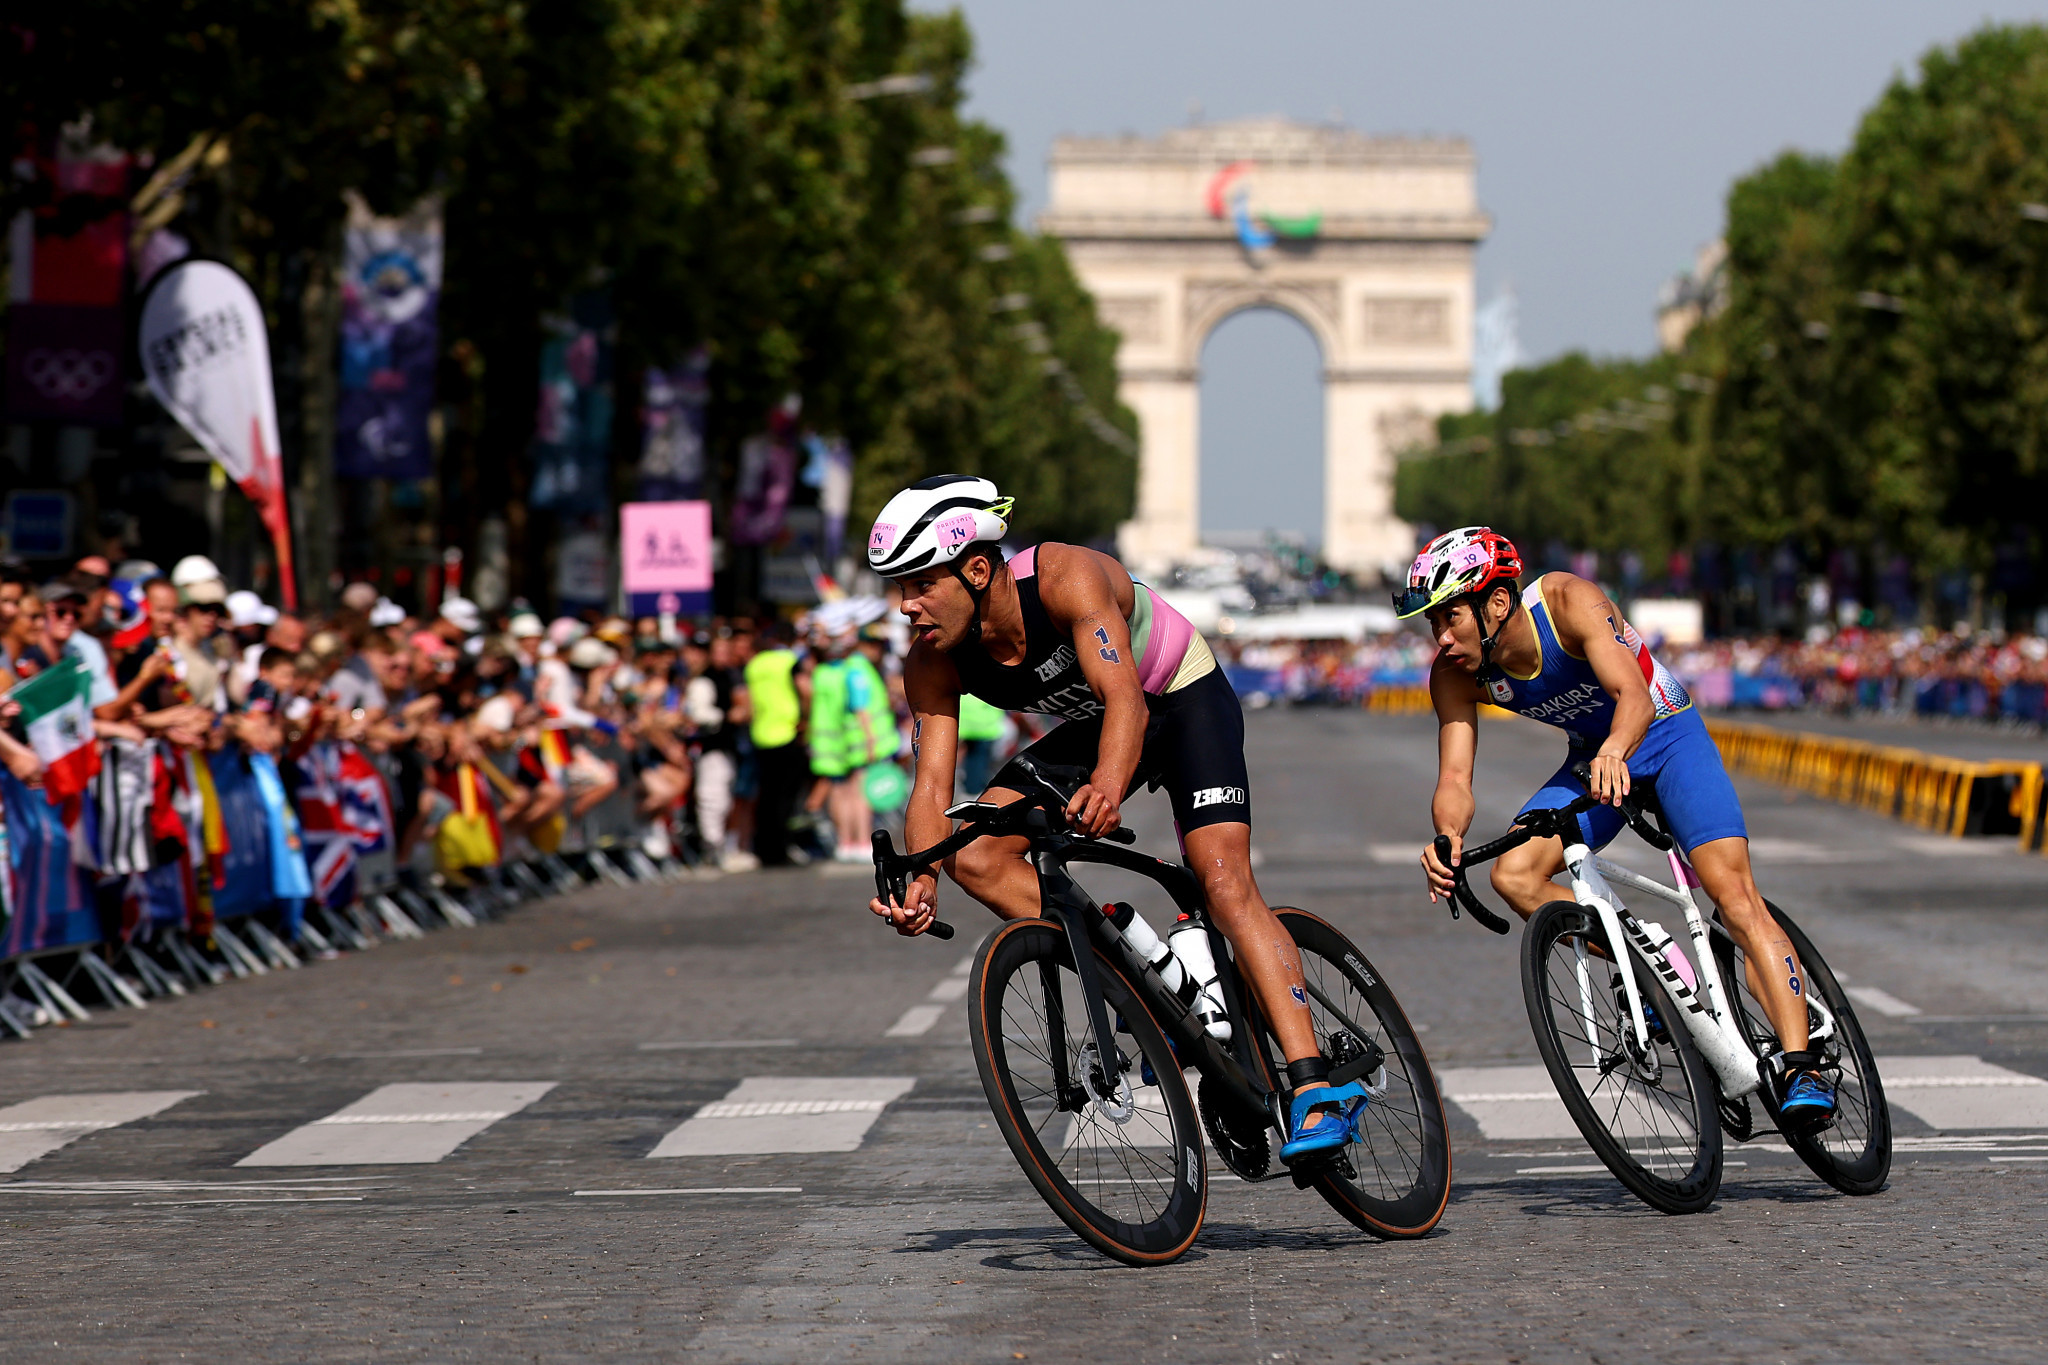 Athletes riding with the Arc de Triomphe in the background. GETTY IMAGES